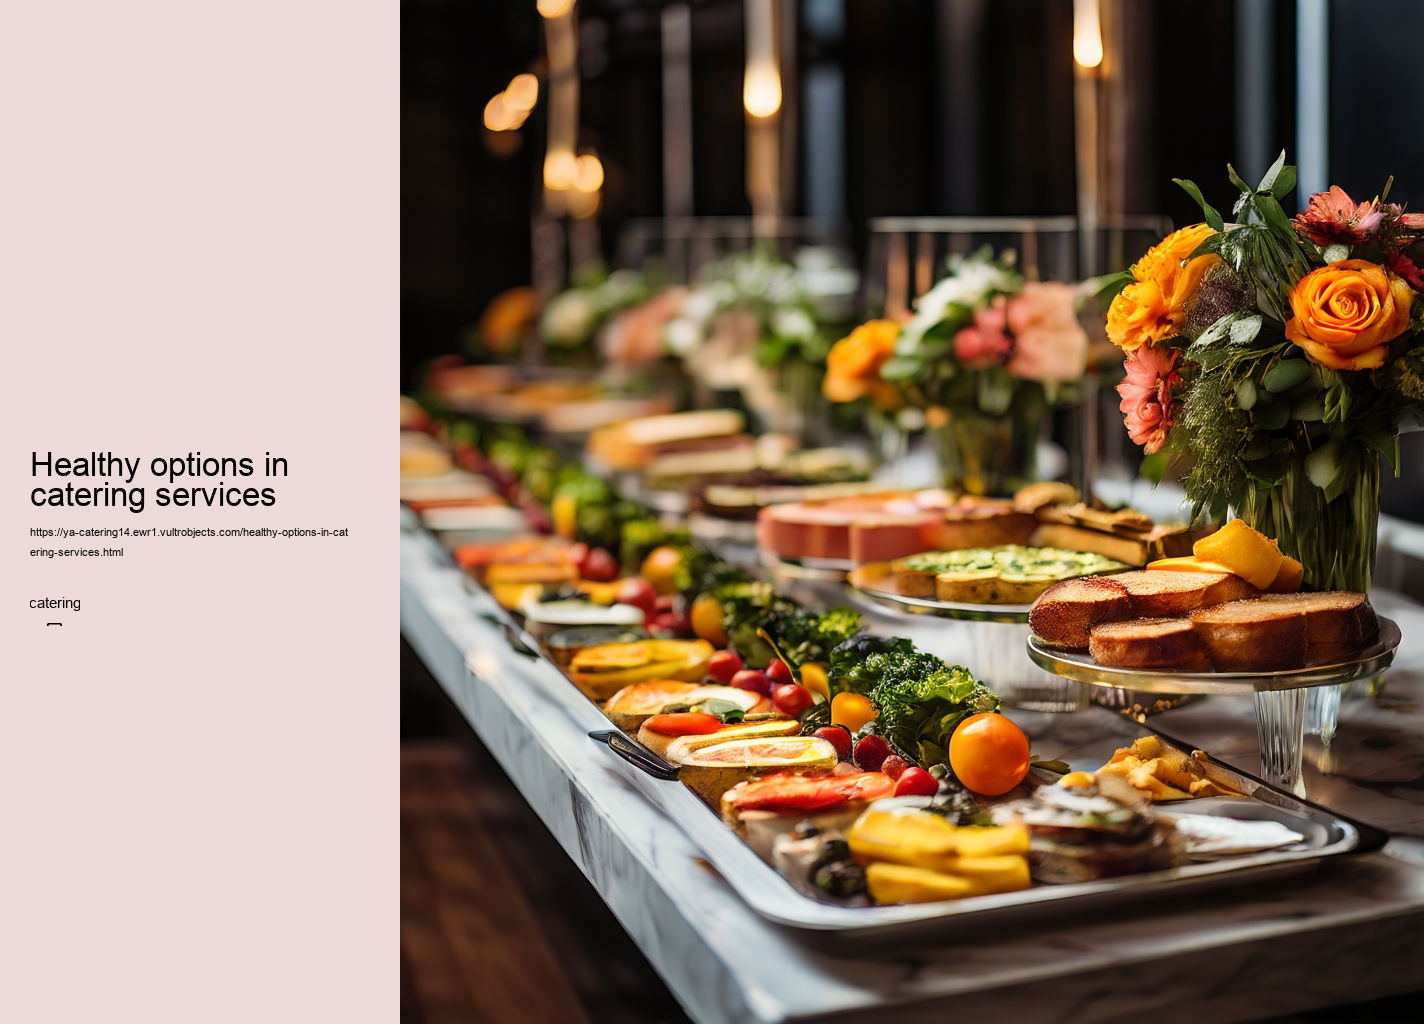 Healthy options in catering services